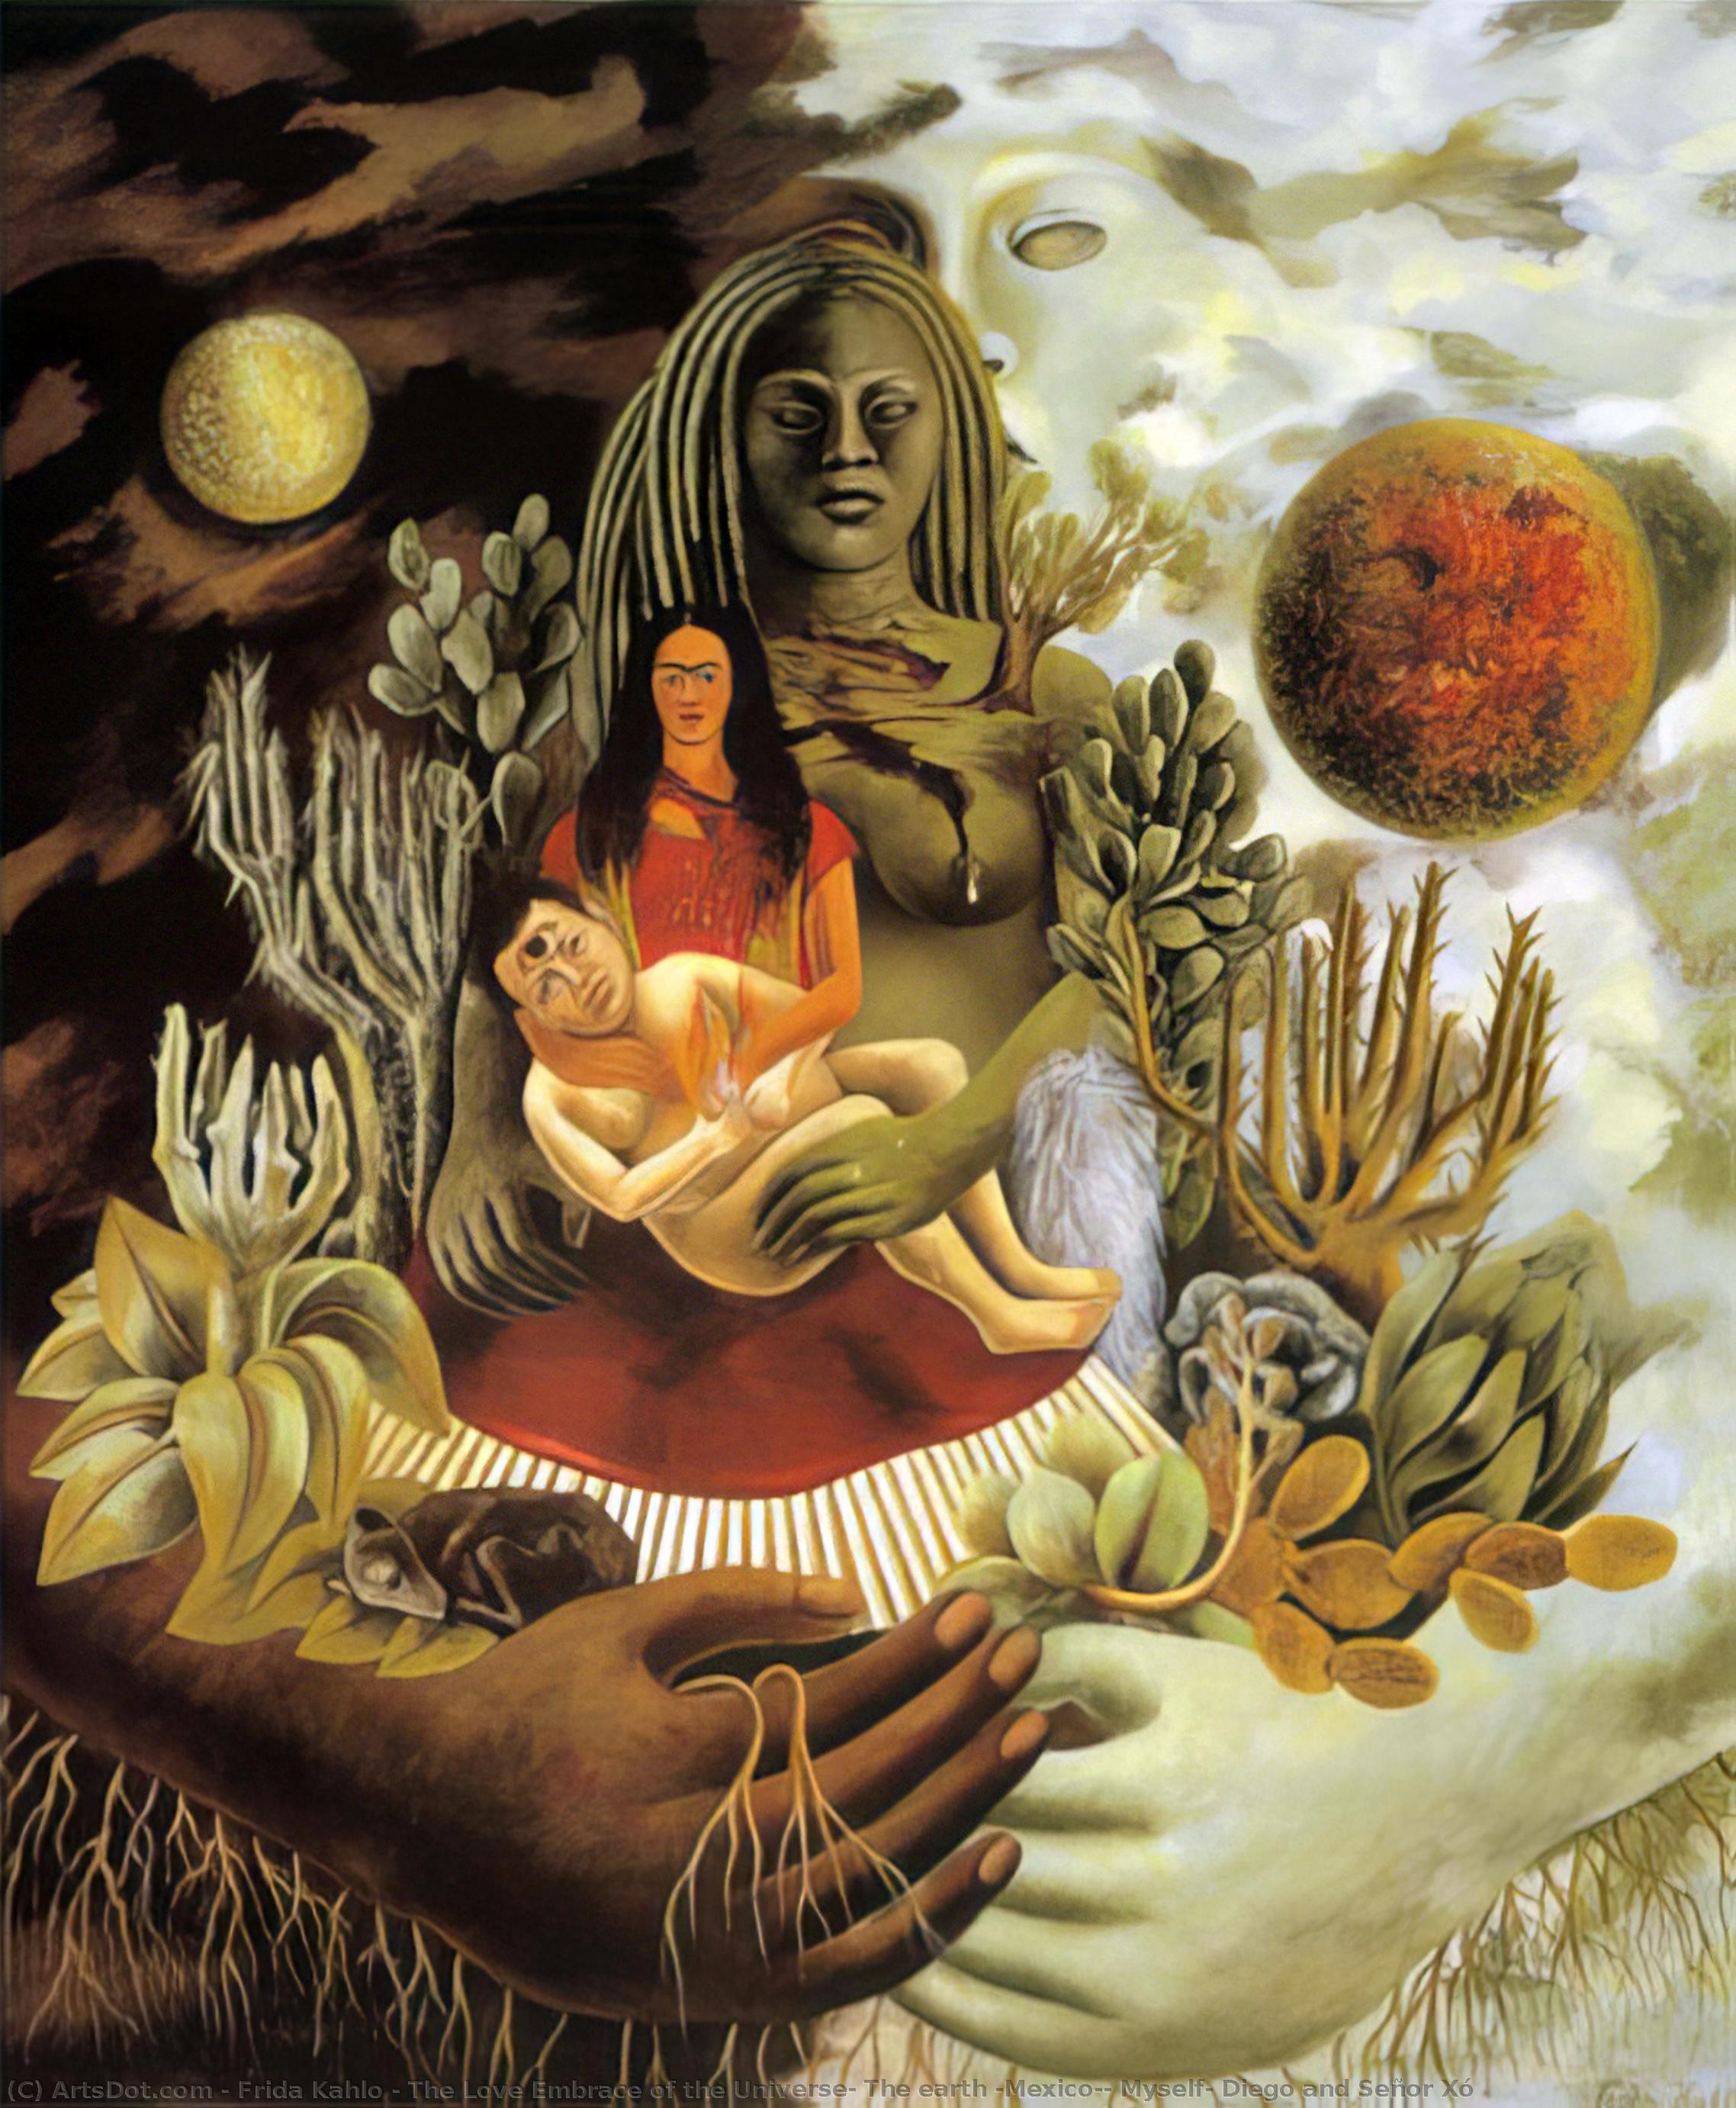 WikiOO.org - 백과 사전 - 회화, 삽화 Frida Kahlo - The Love Embrace of the Universe, The earth (Mexico), Myself, Diego and Señor Xó